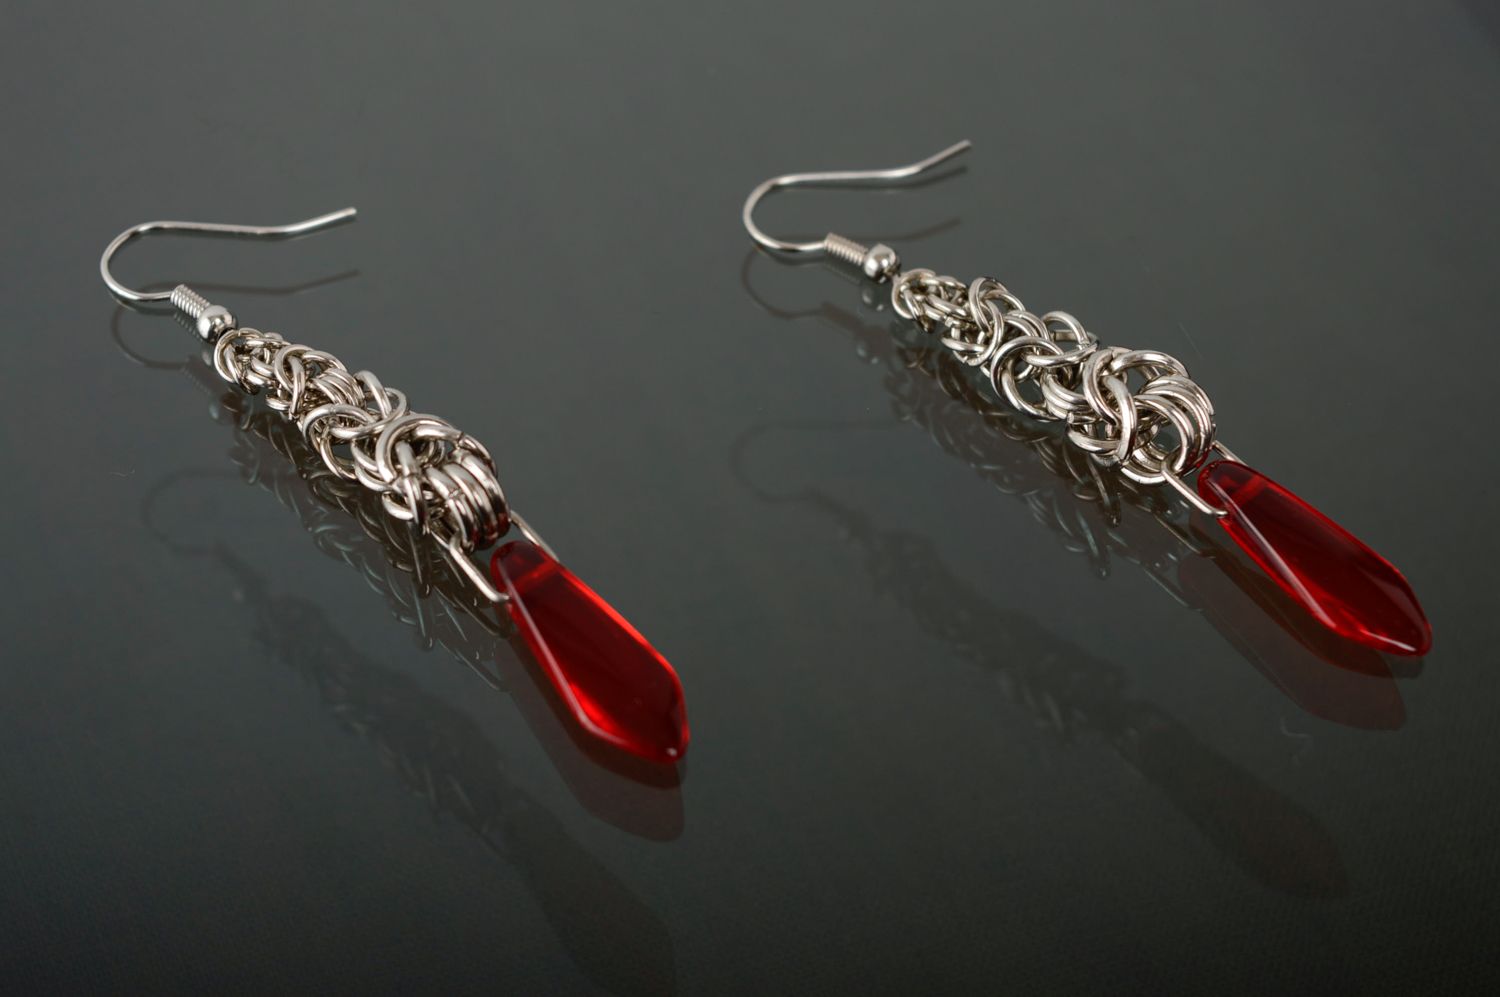 Long metal earrings with red beads made using chain armor weaving technique photo 2